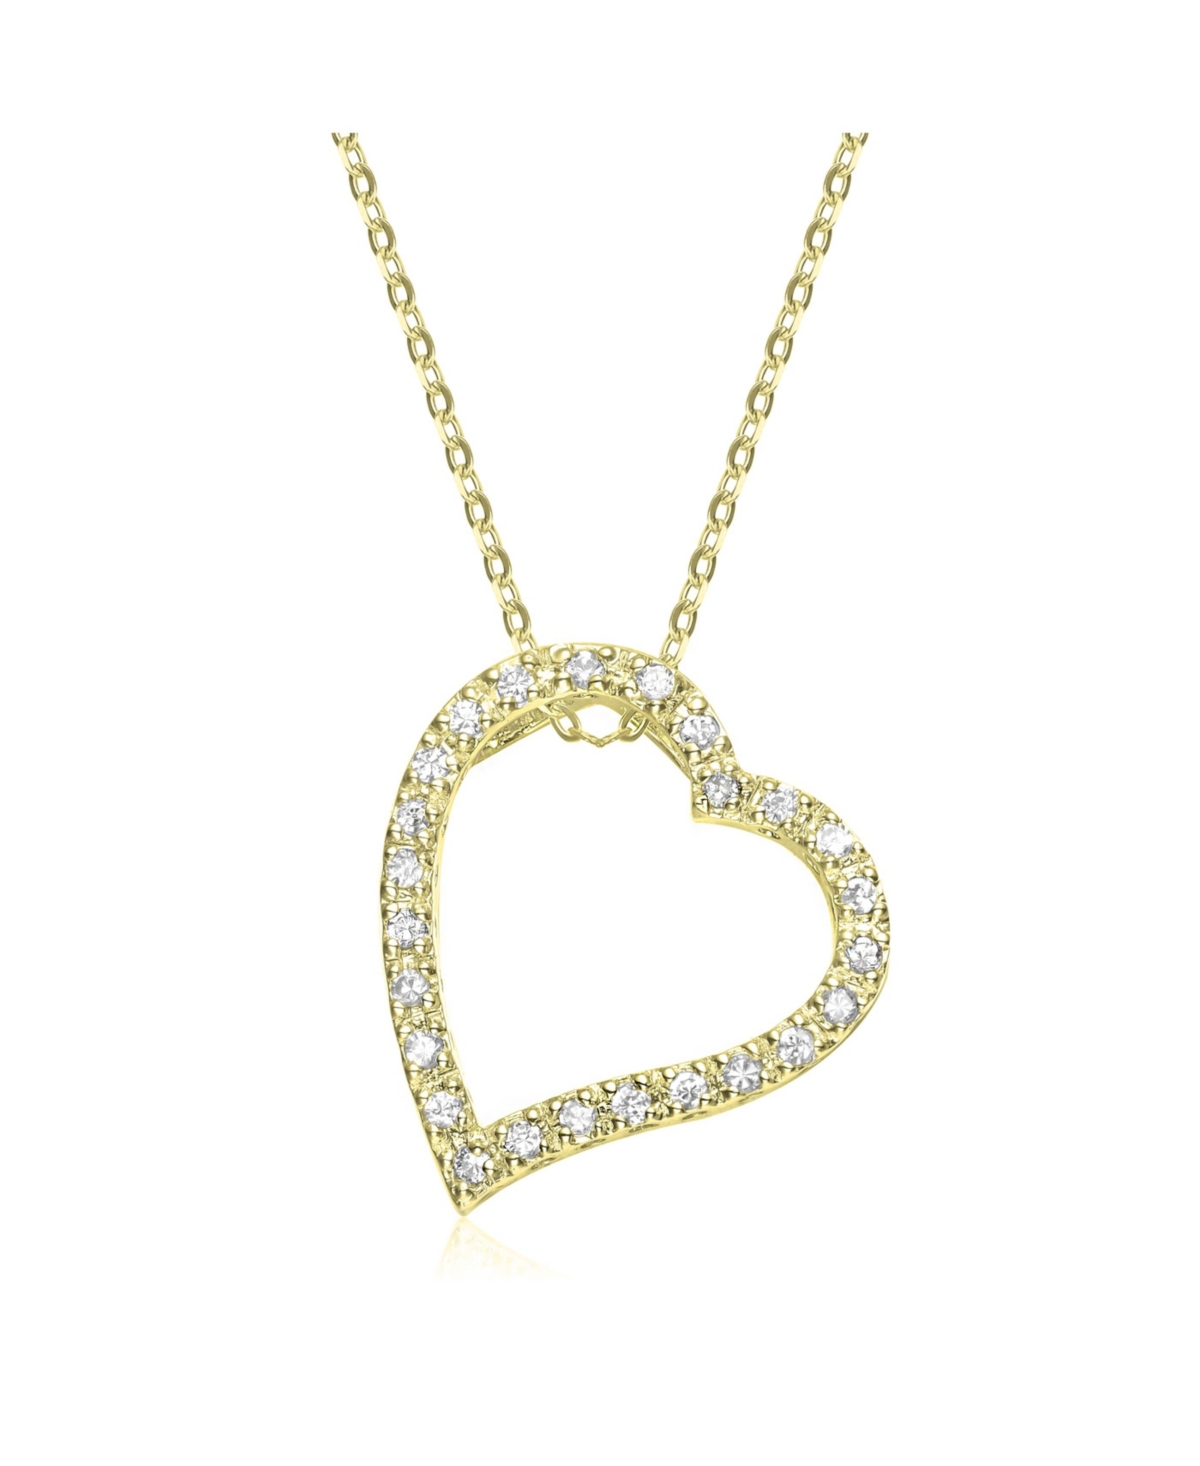 14k Gold Cubic Zirconia Ribbon Heart Halo Floating Pendant Necklace - Gold